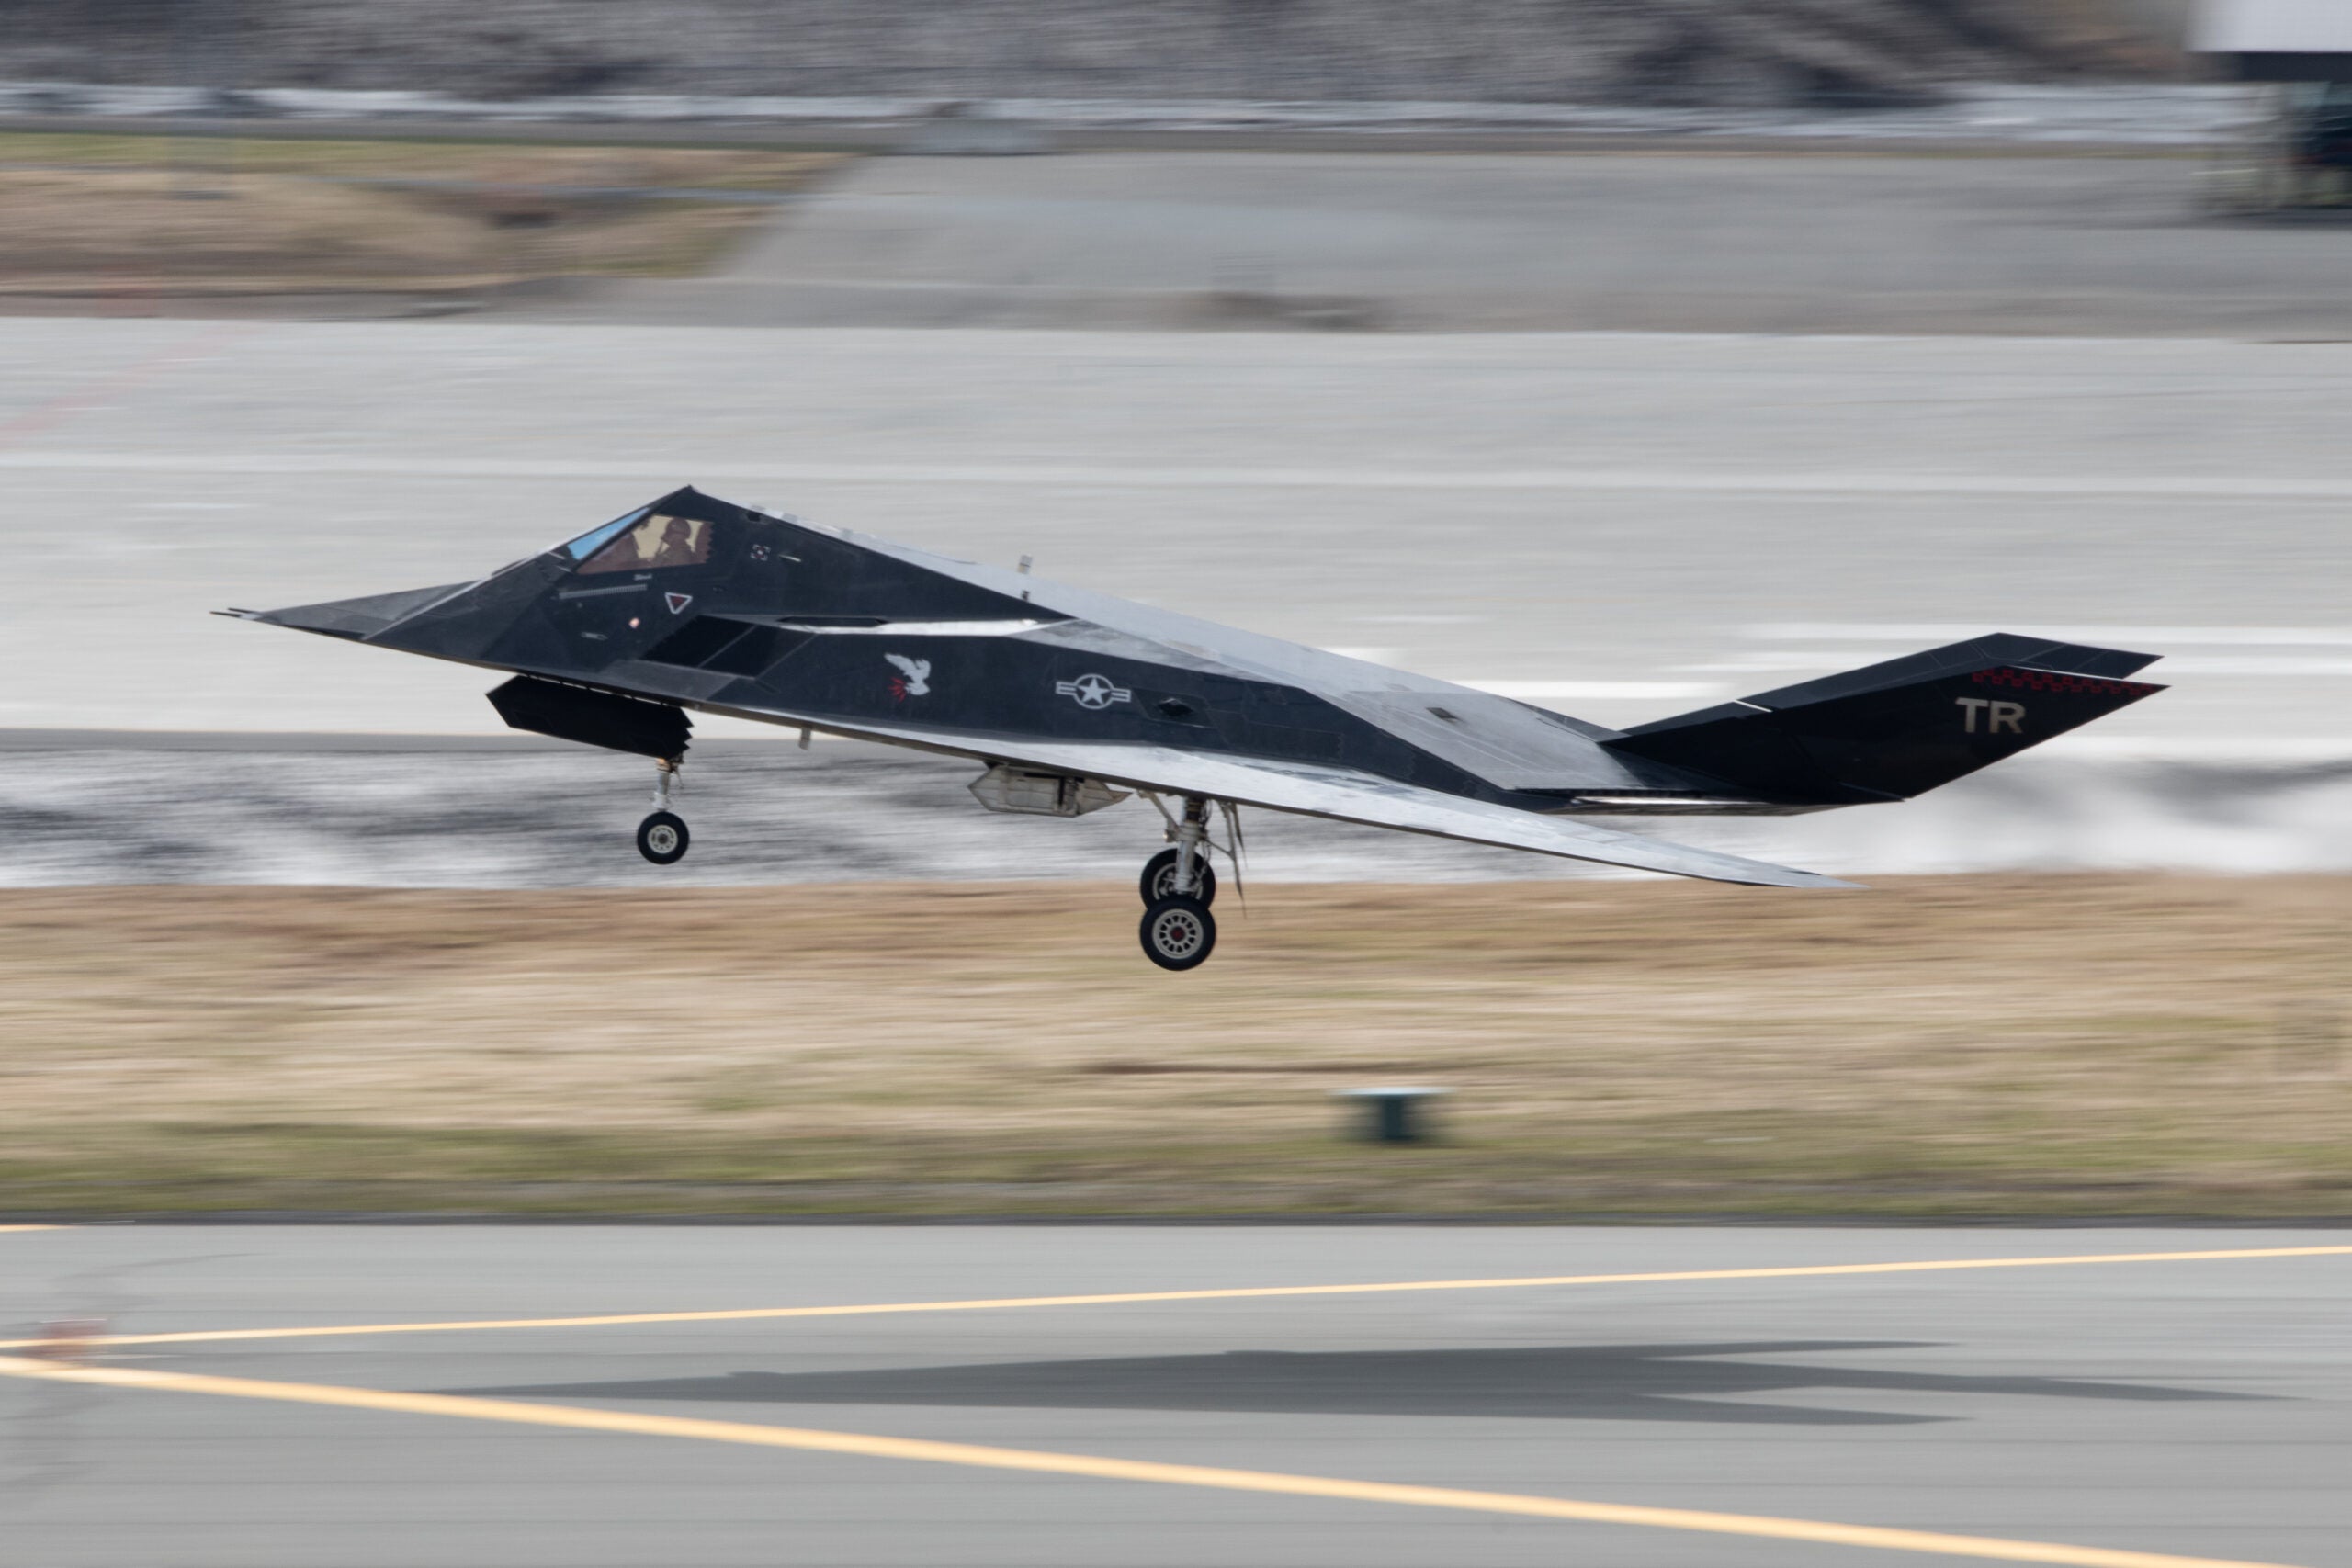 A U.S. Air Force F-117 Nighthawk prepares to land during Northern Edge 23-1 at Joint Base Elmendorf-Richardson, Alaska, May 10, 2023. Northern Edge 23-1 provides an opportunity for joint, multinational and multi-domain operations designed to implement high-end, realistic war fighter training, develop and improve joint interoperability, and enhance the combat readiness of participating forces. (U.S. Air Force photo by Senior Airman Patrick Sullivan)